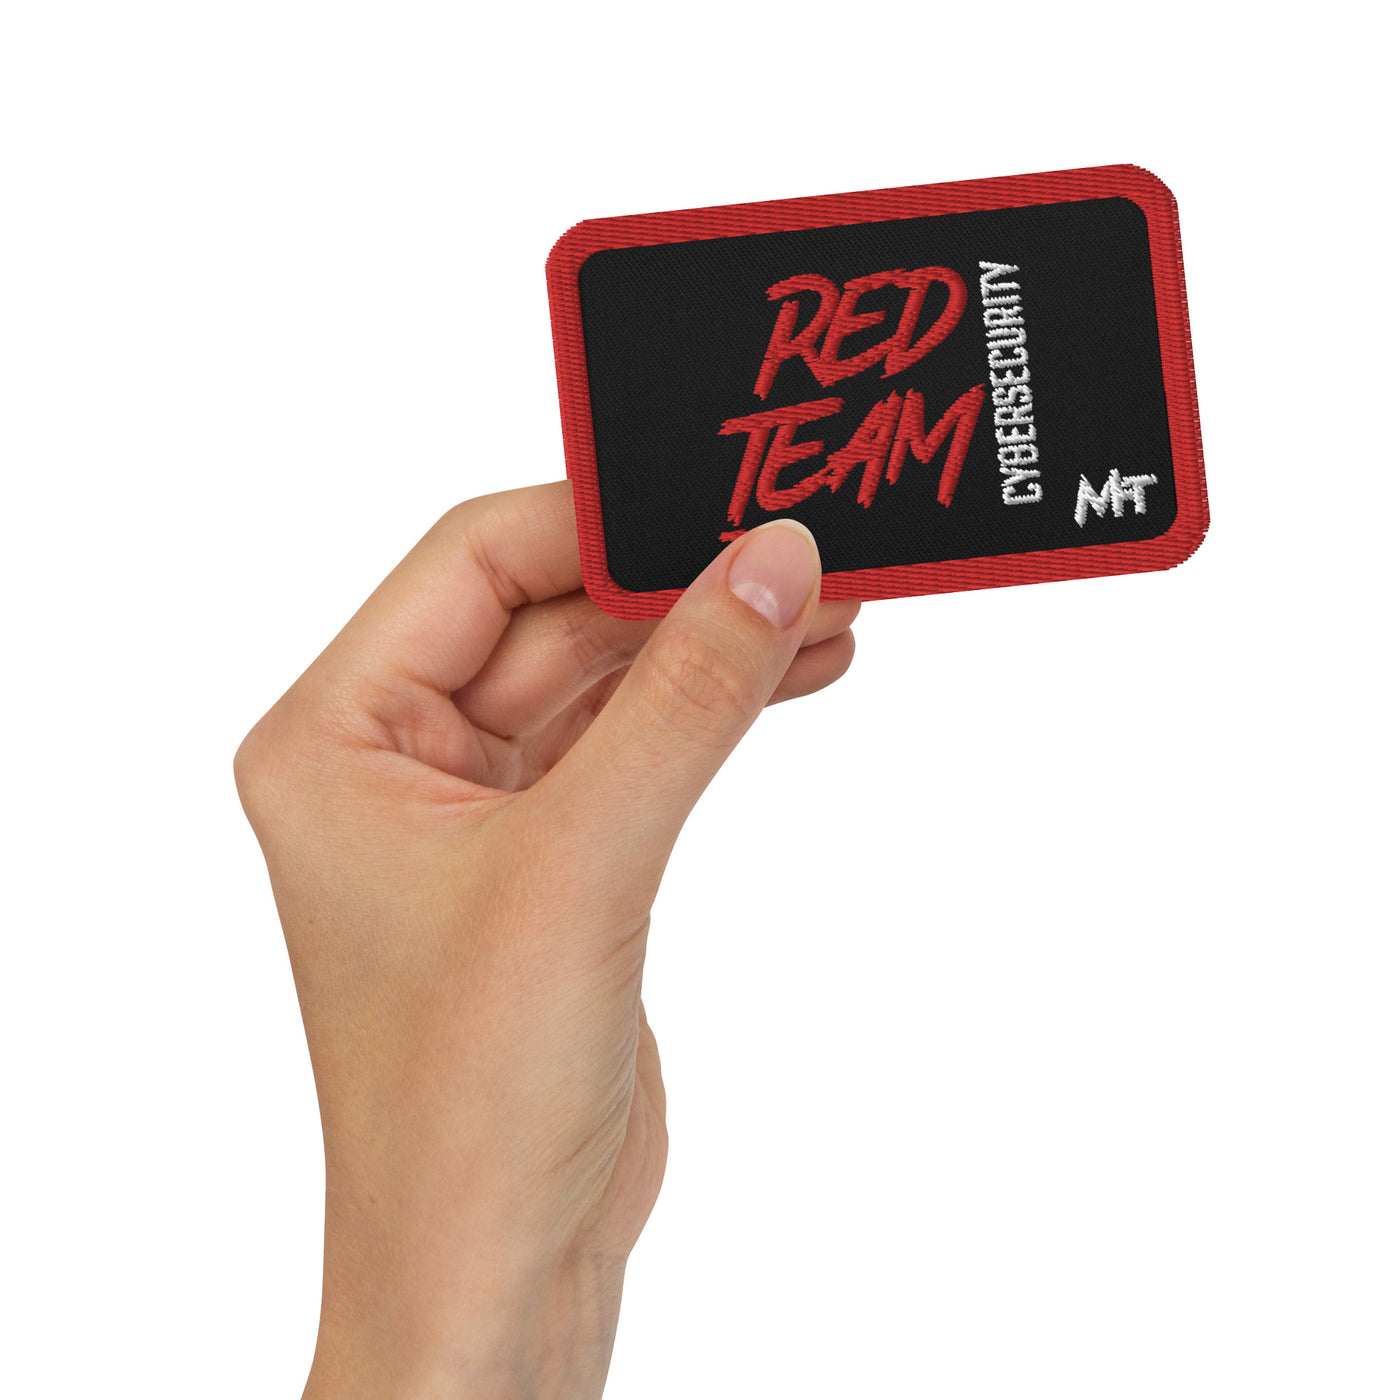 Cyber Security Red Team V6 - Embroidered patches